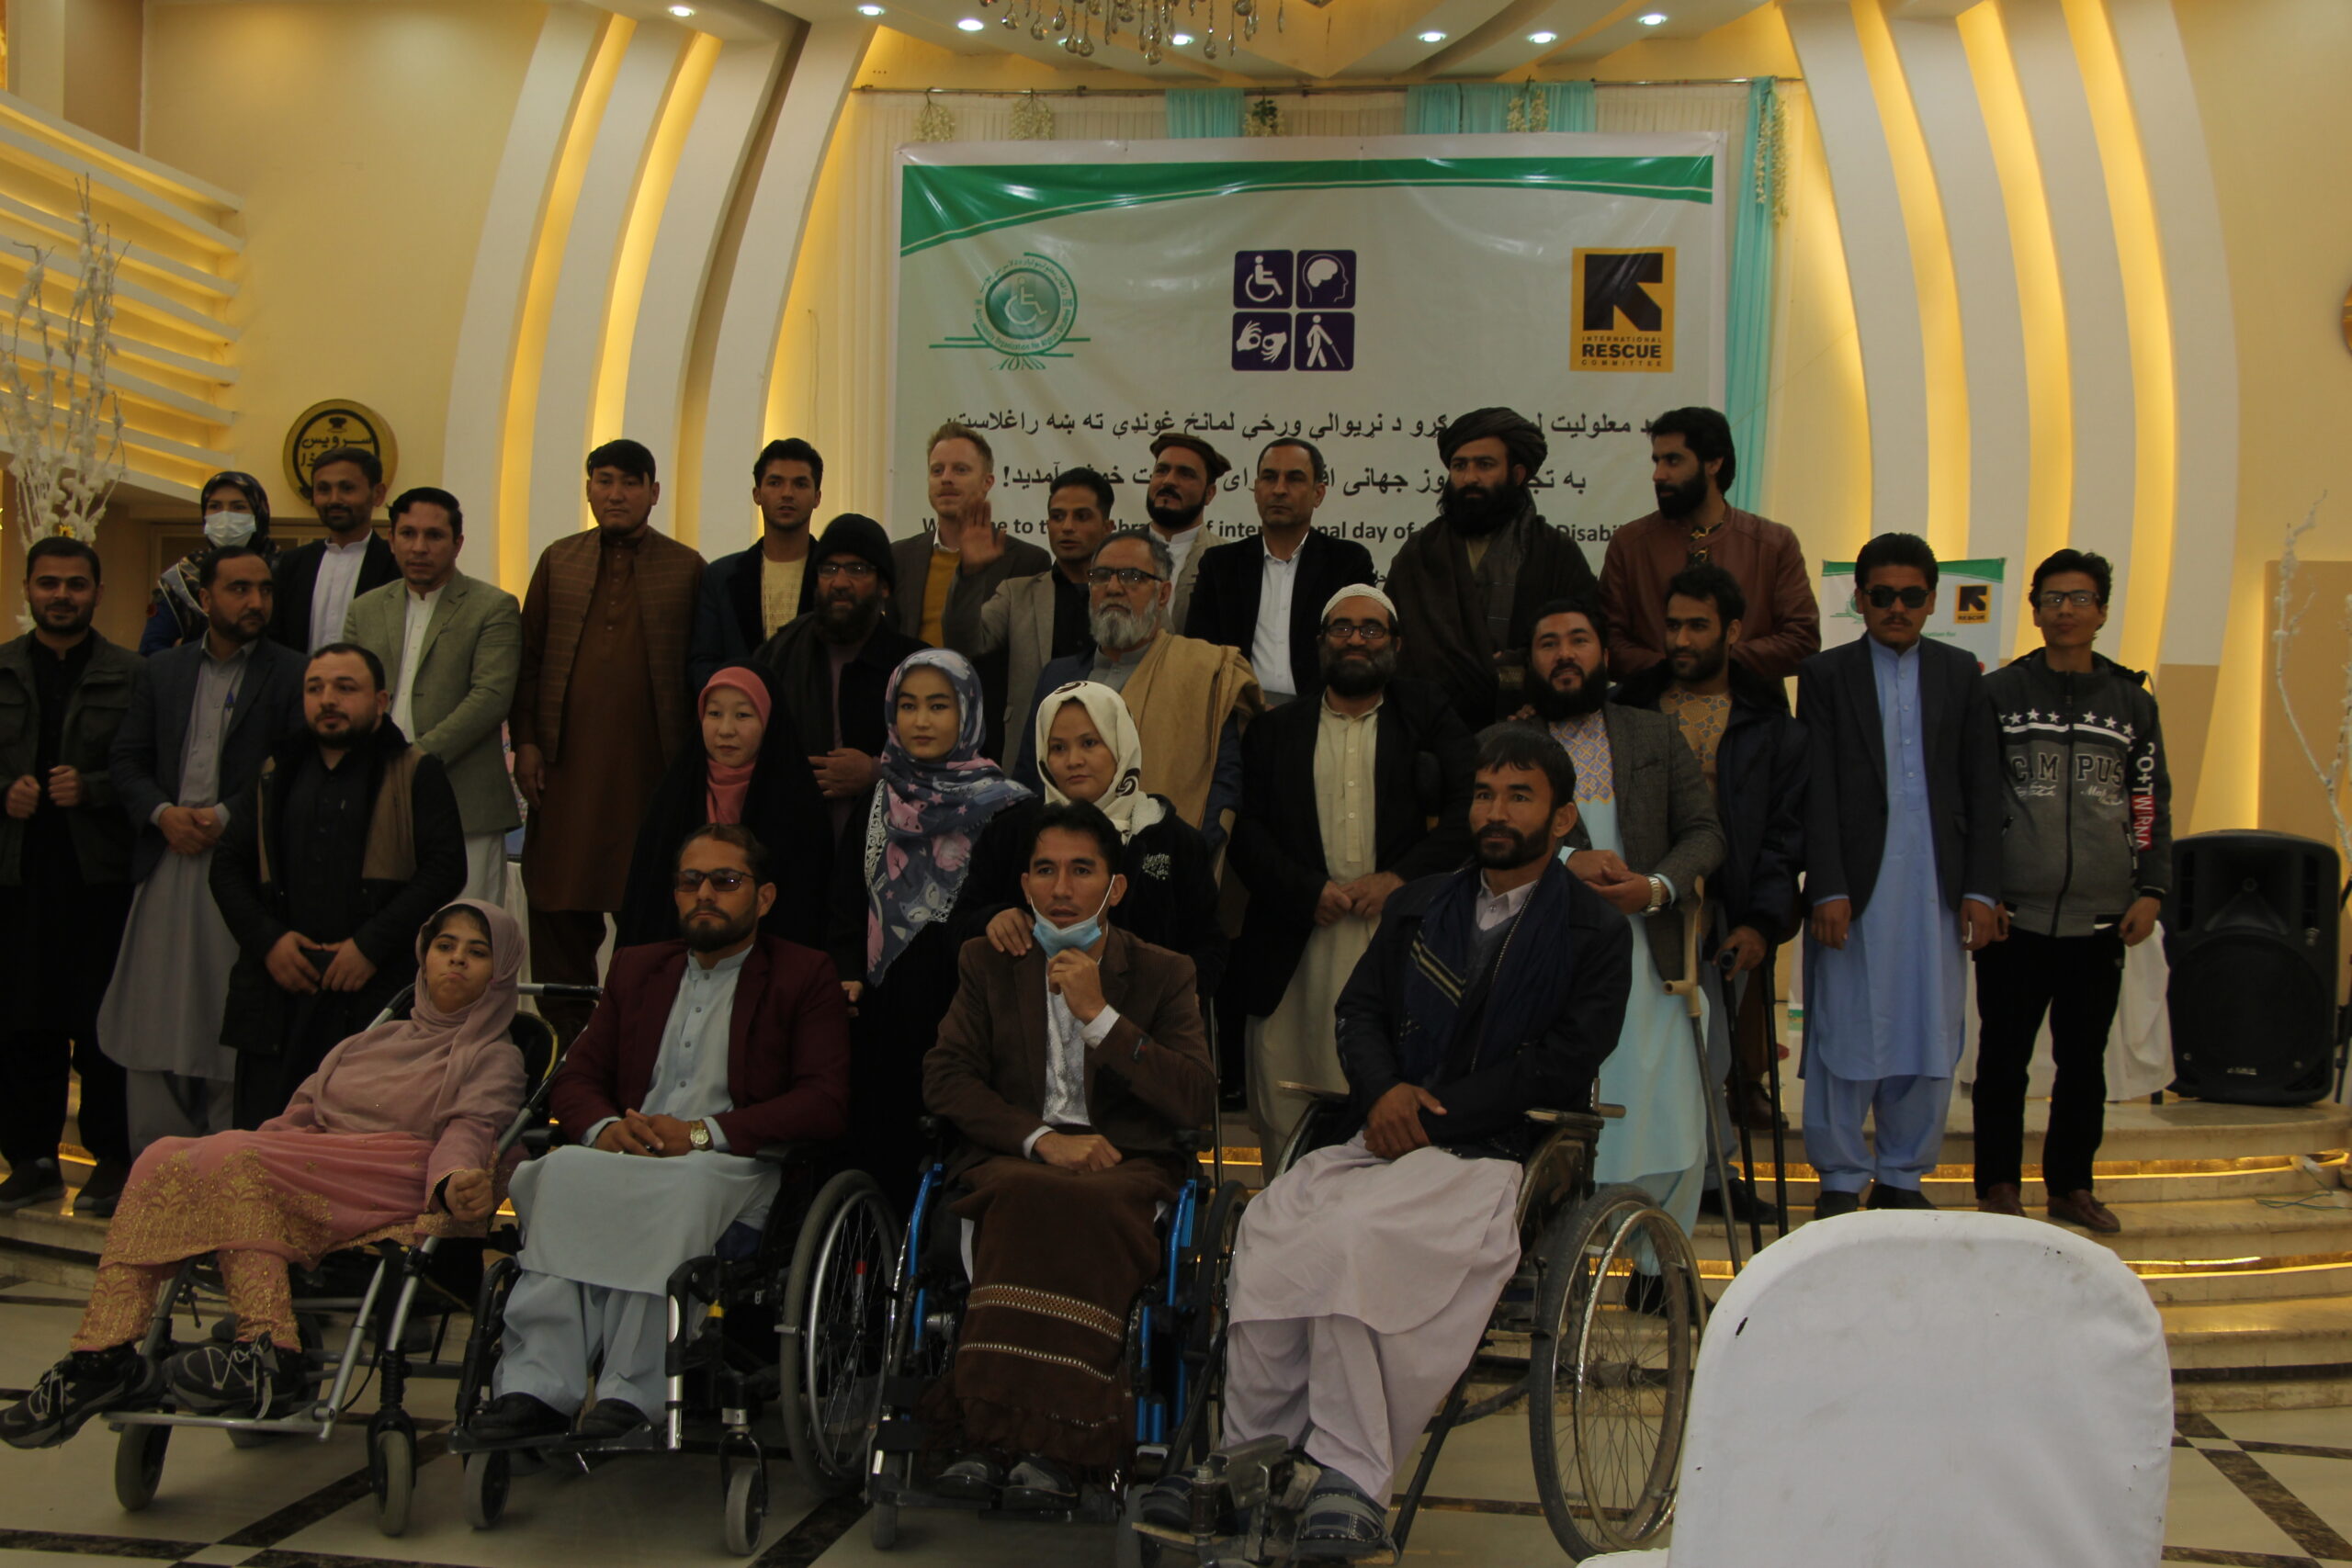 3rd December International Day of Person with Disabilities in Herat Province 